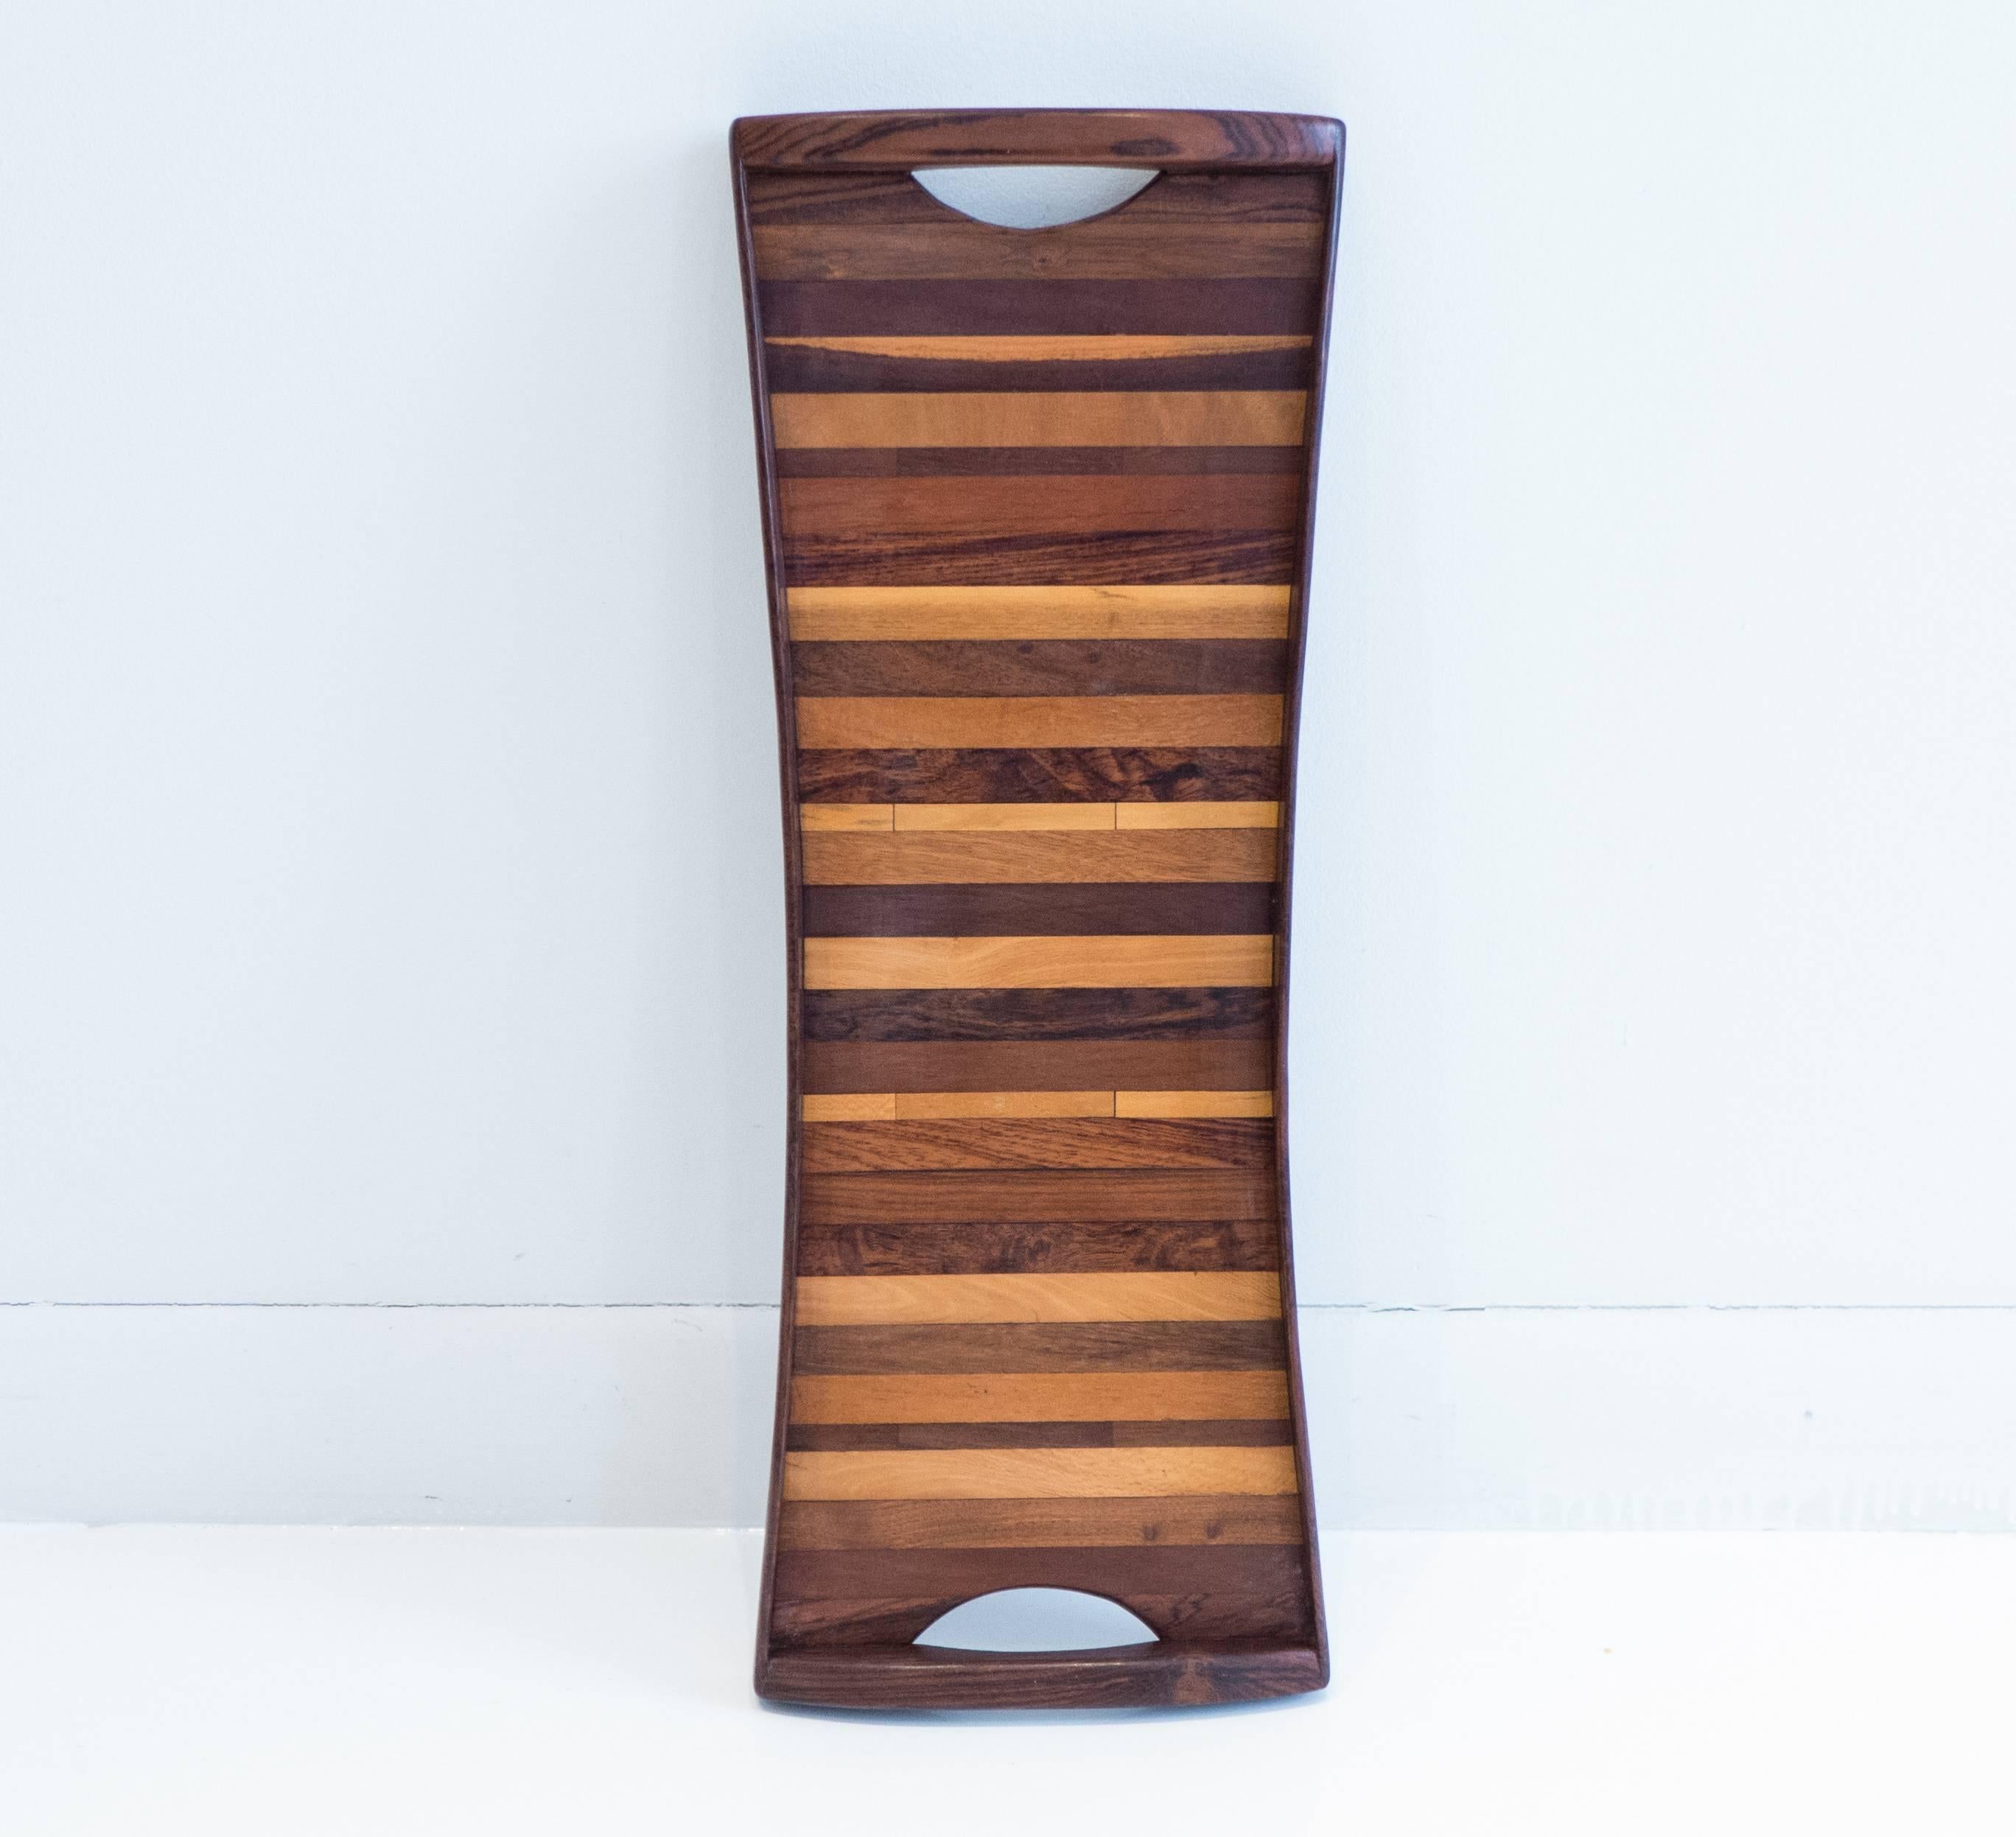 Nicely proportioned, butterfly-shaped tray with cocobolo sides and an interior pattern created out of strips of exotic woods. By expat designer Don Shoemaker, produced at his Senal, S.A. studio, Morelia, Mexico, circa 1960s. Retains original Senal